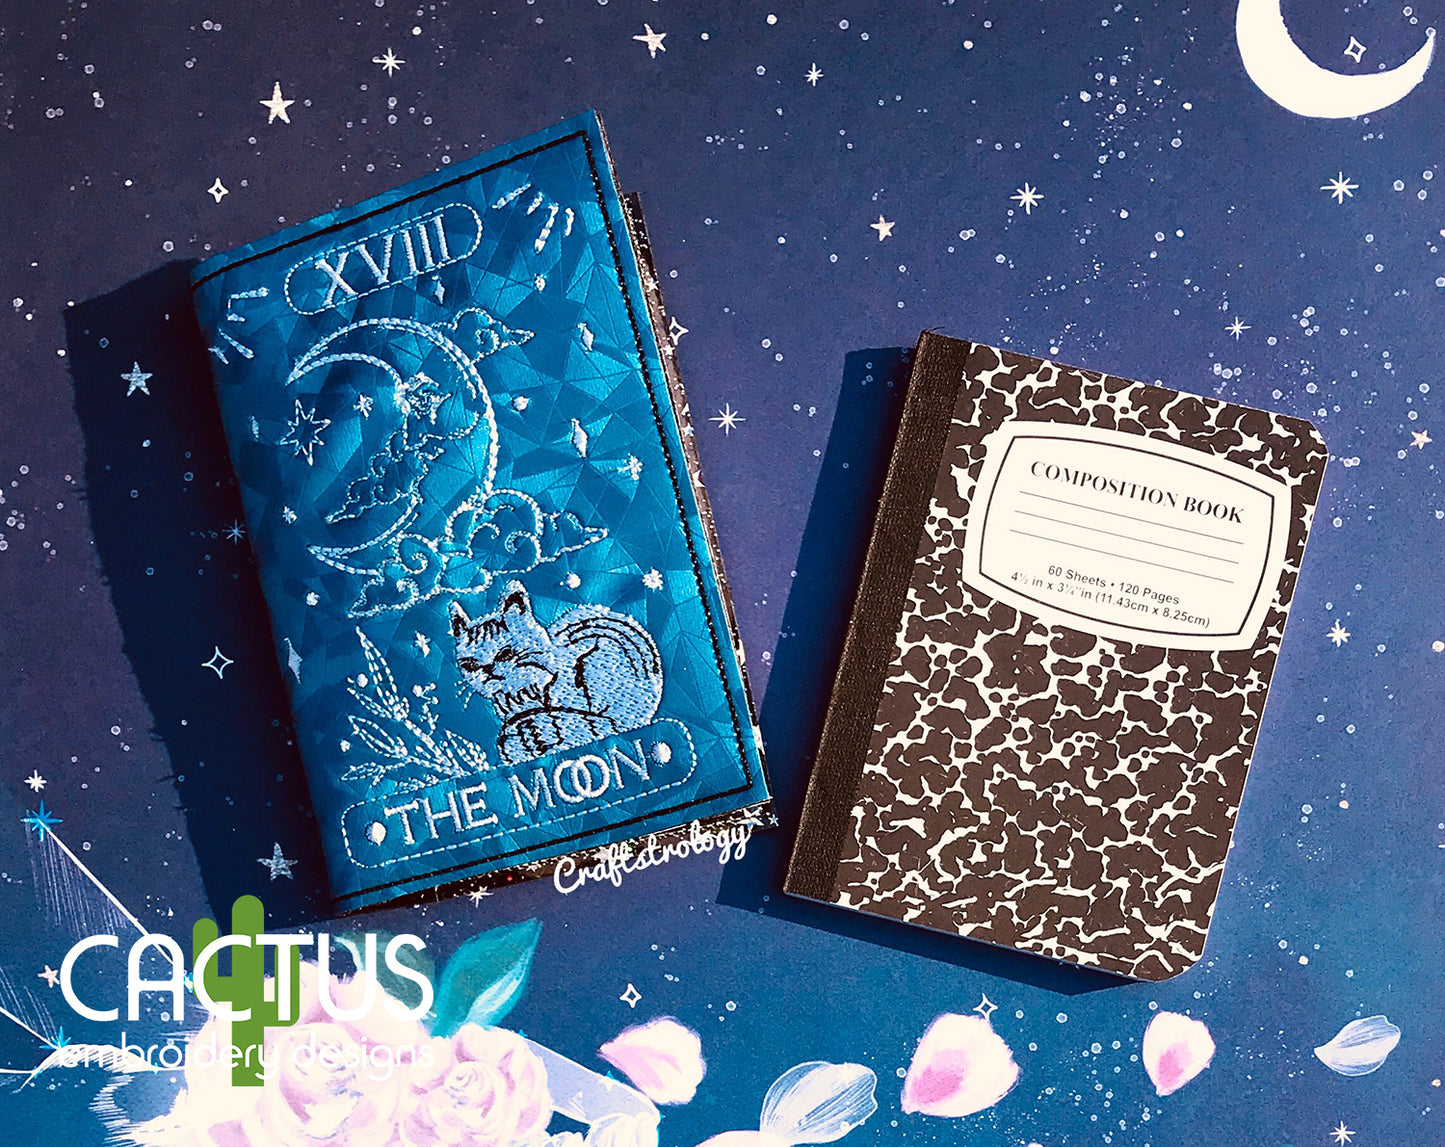 The Moon Card Notebook Cover